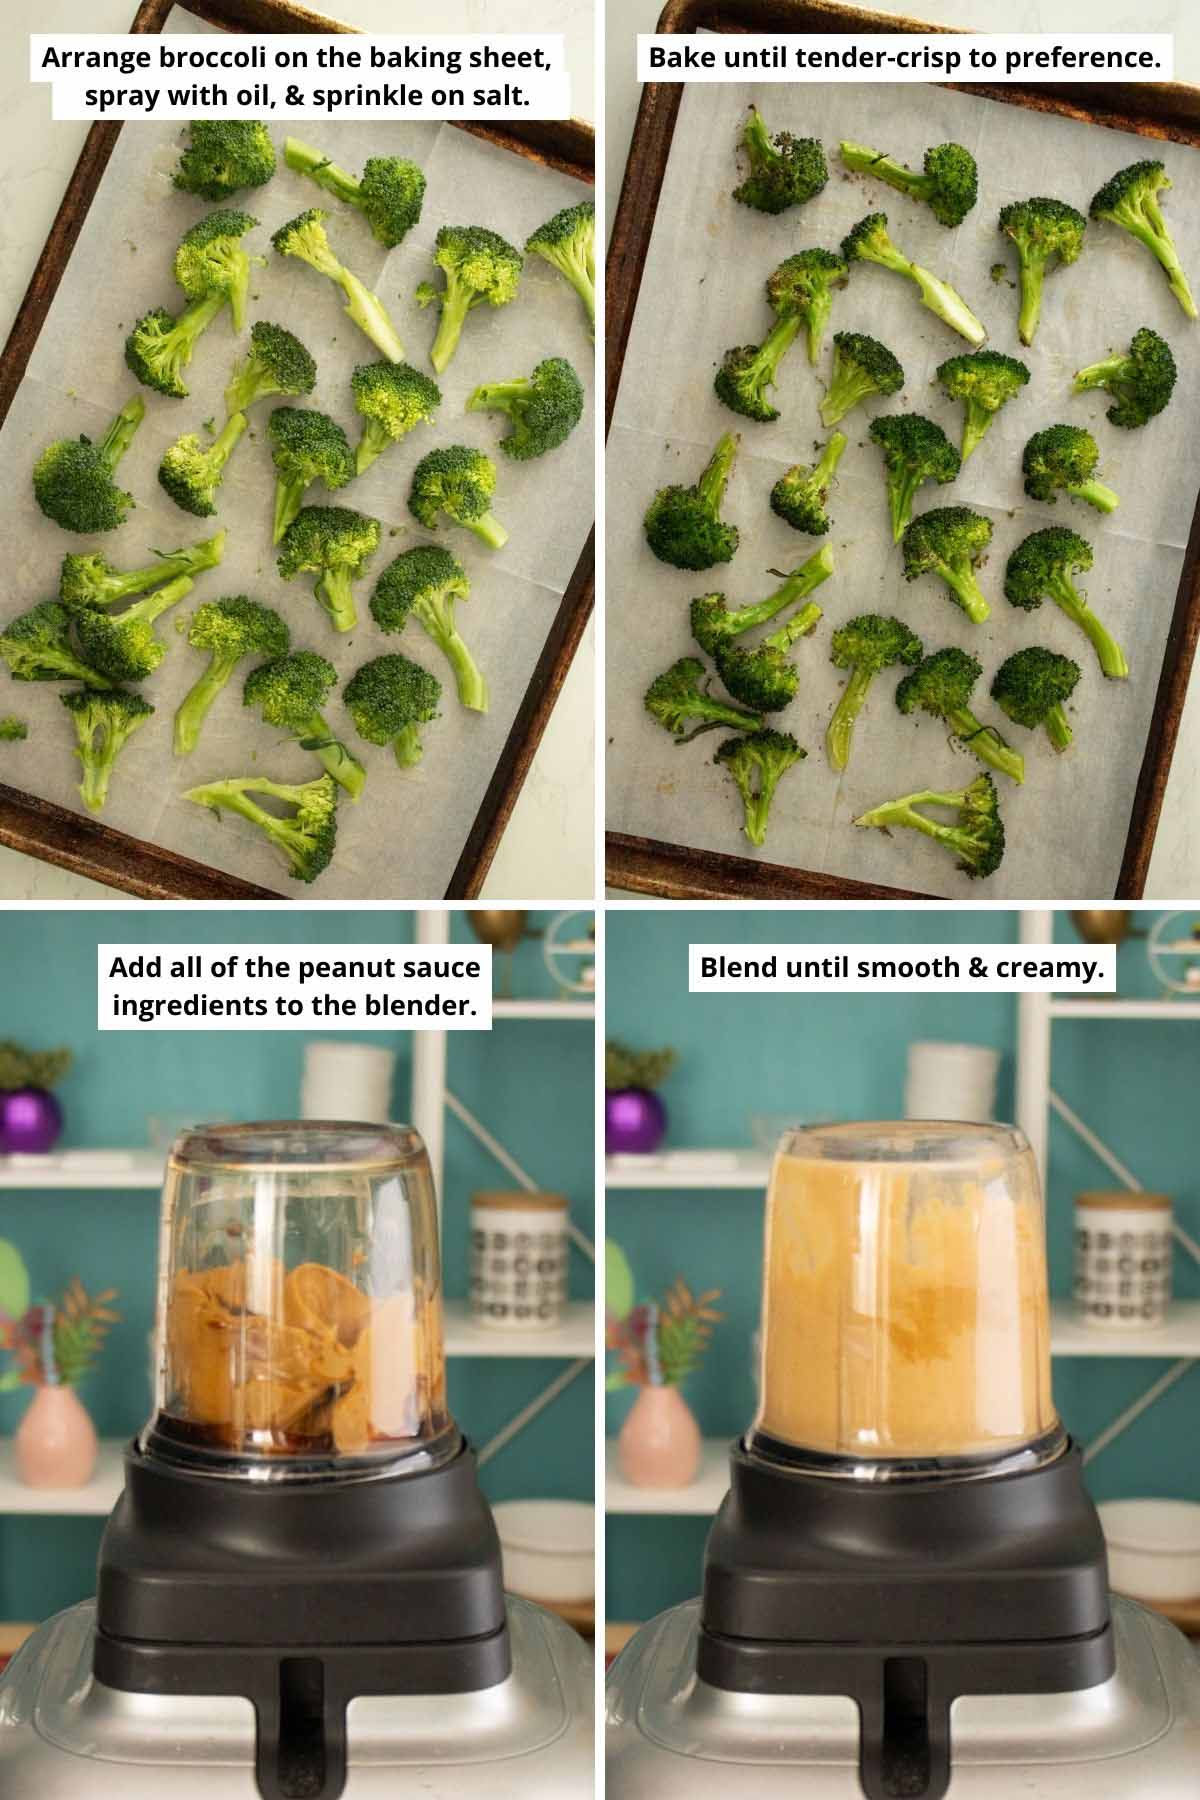 image collage showing broccoli on a baking sheet before and after roasting and peanut sauce ingredients in the blender before and after blending